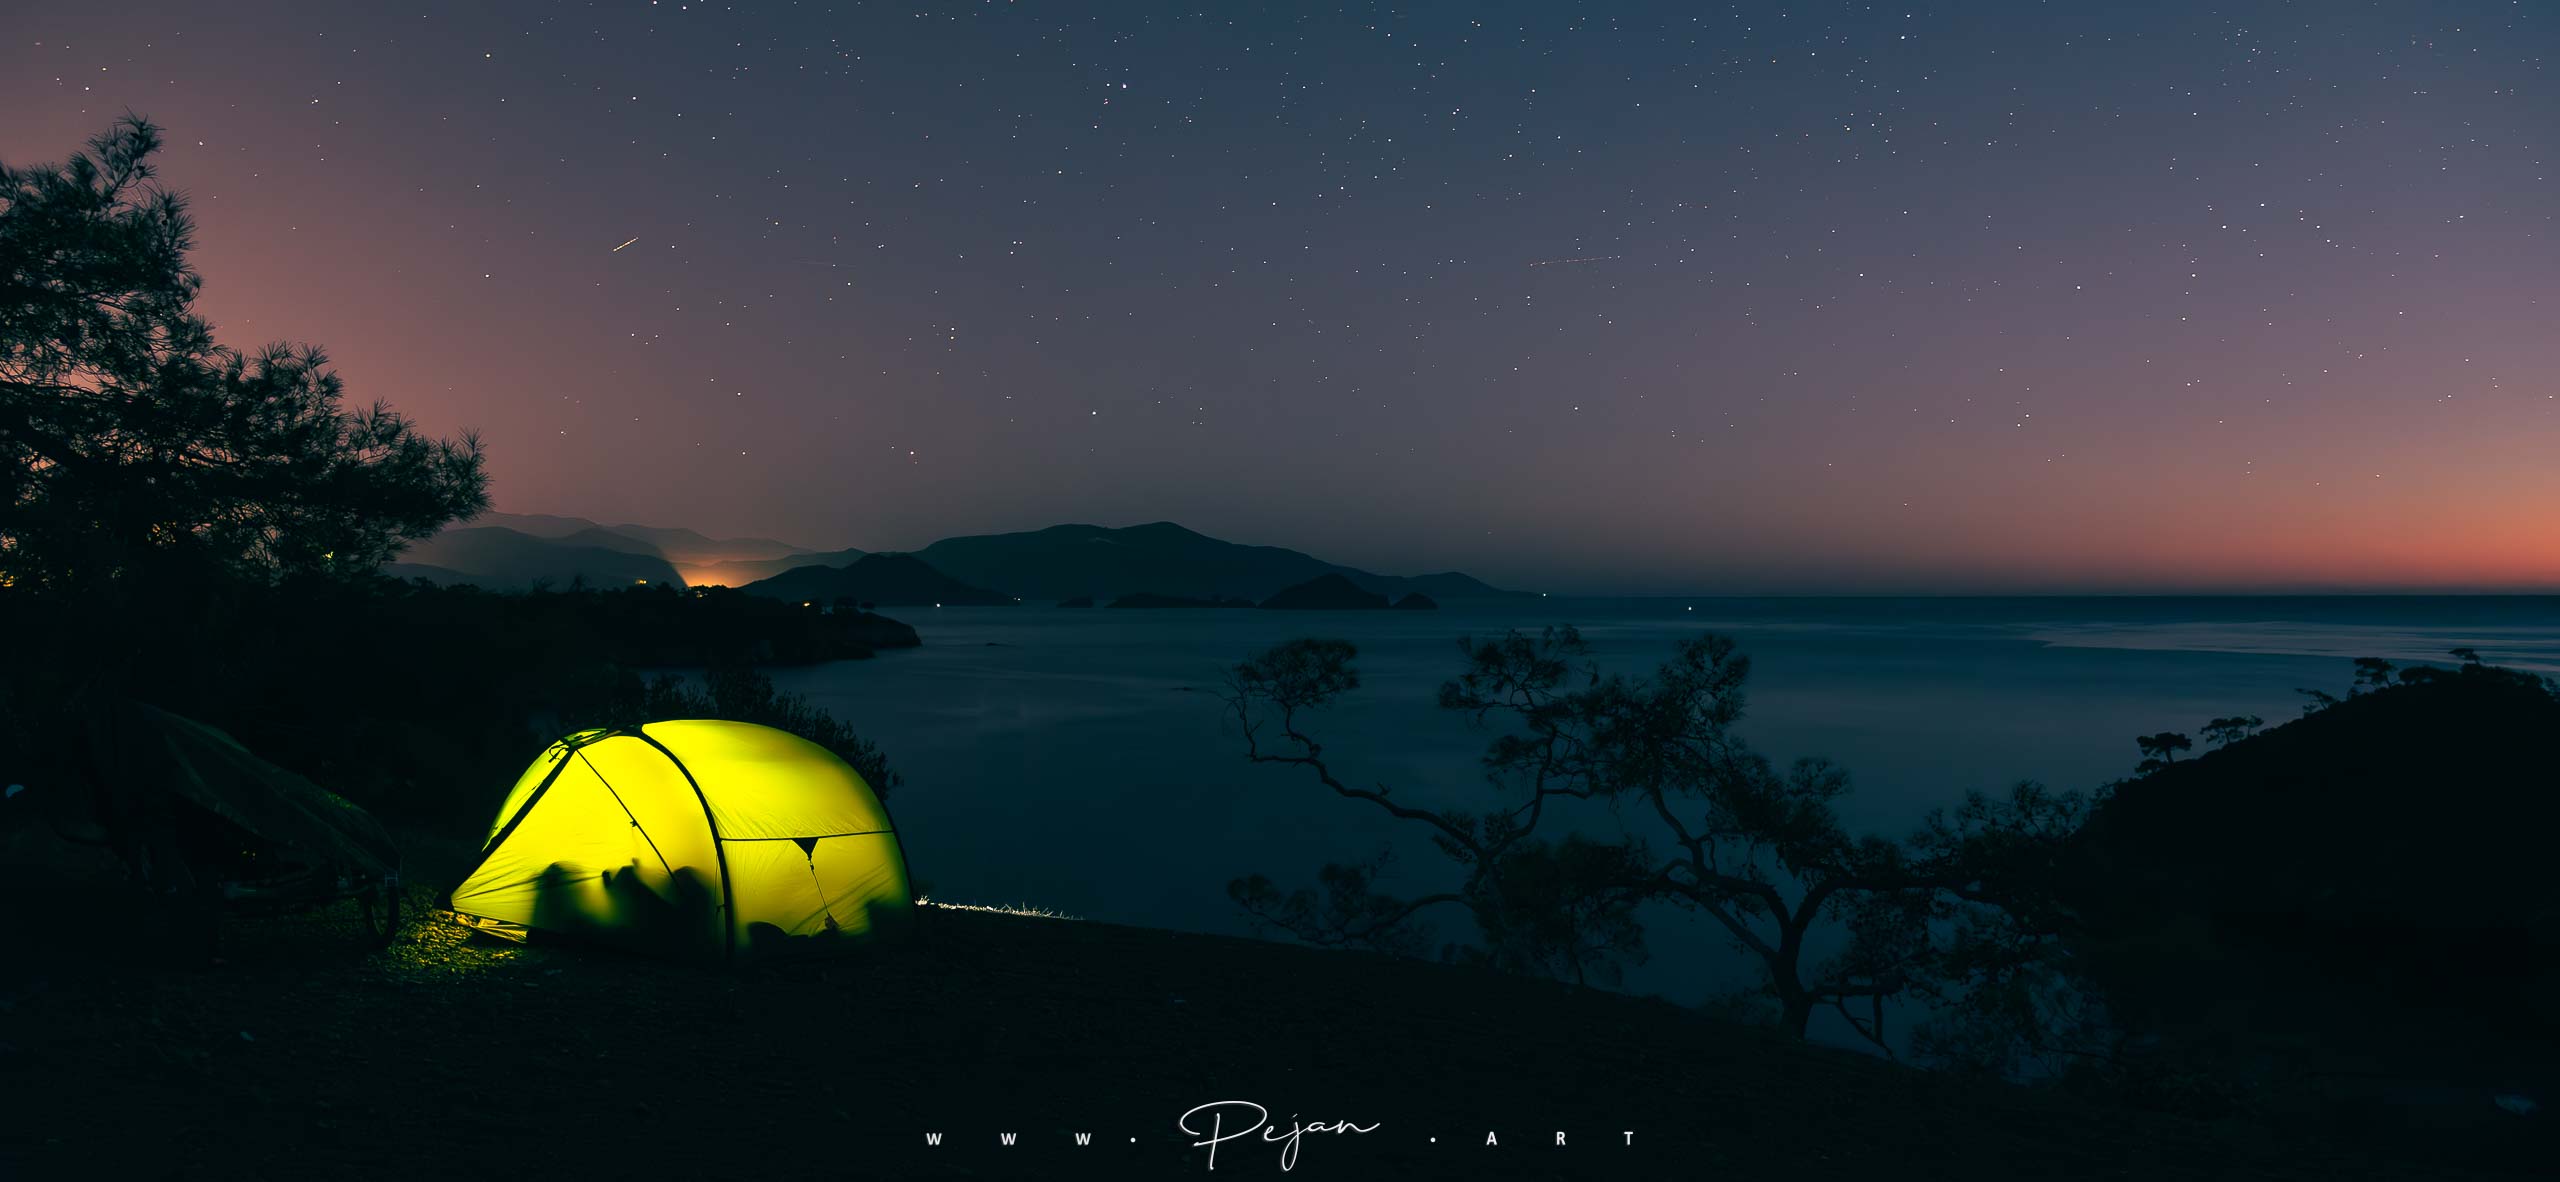 Exped Venus II tent illuminated at night on a cliff overlooking the Aegean Sea, bivouac under a star-studded sky near Fethiye, Turkey